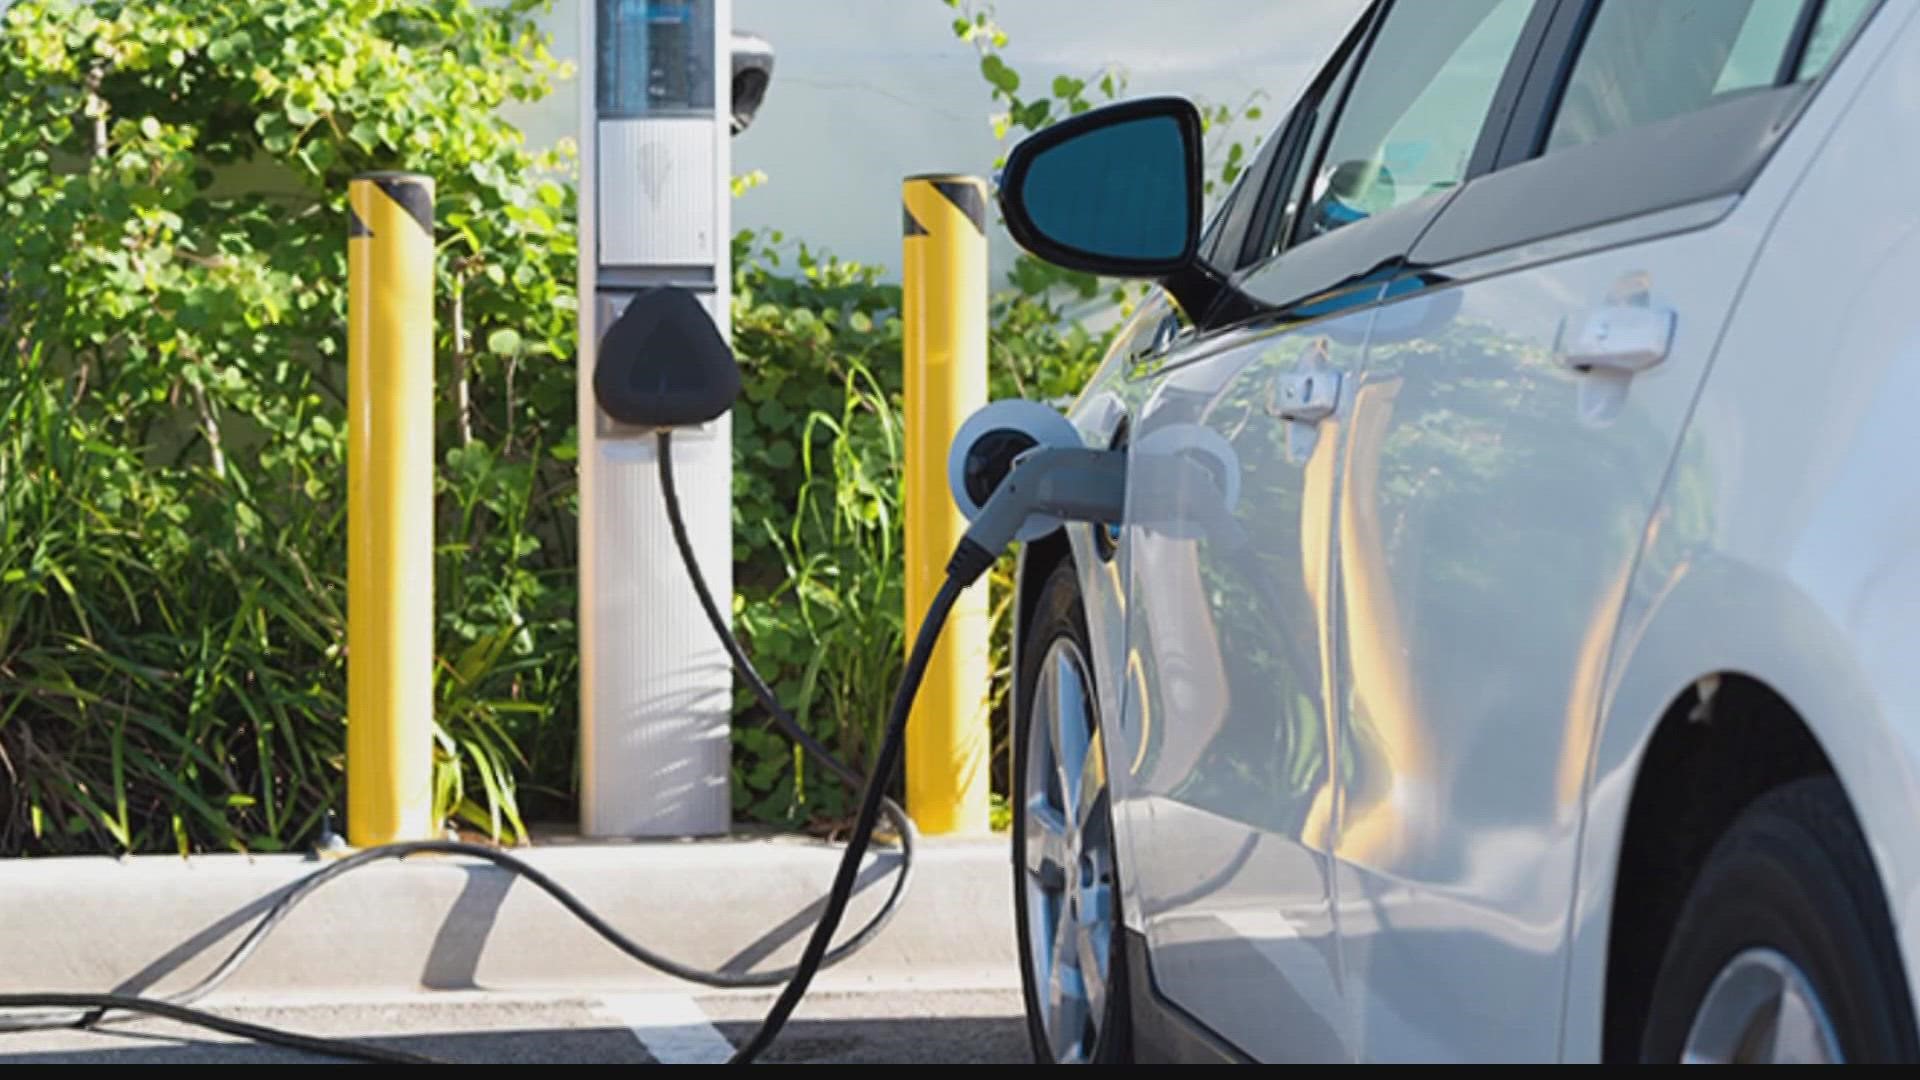 INDOT is investing $100 million in electric vehicle charging stations, but some community leaders want to make sure all voices are heard.